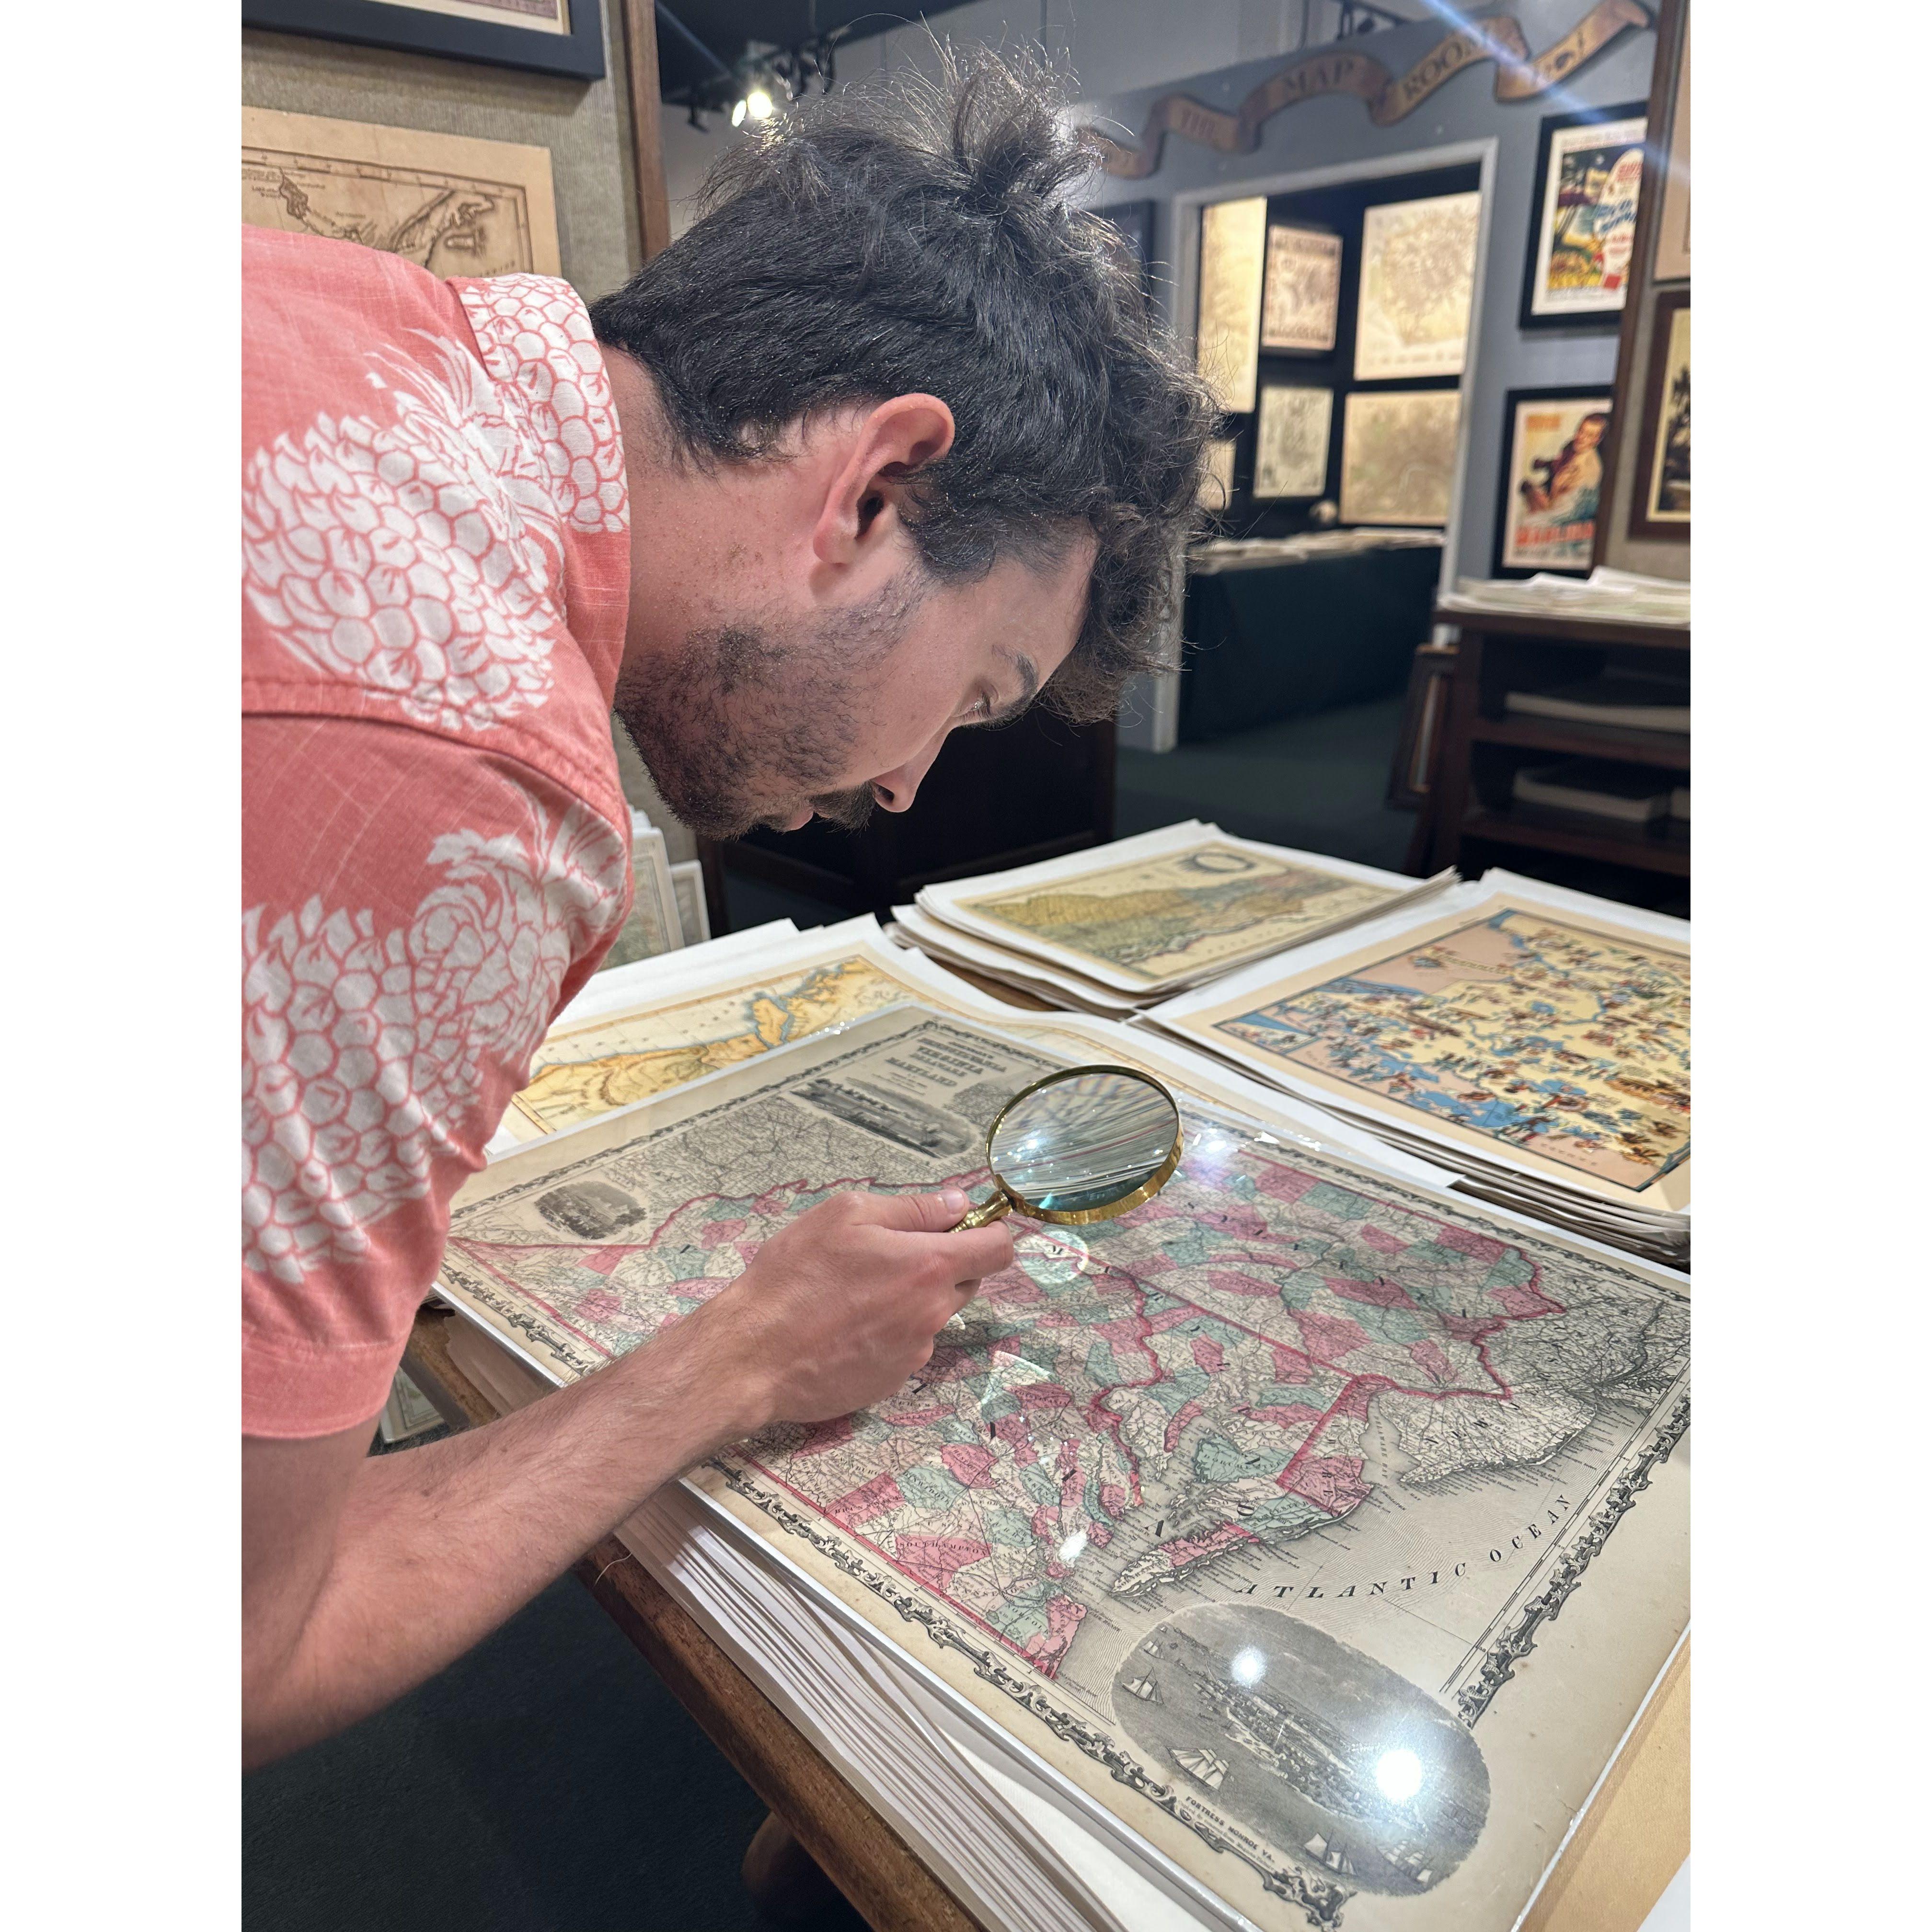 We came across a vintage map store in Hawaii, and probably spent over 2.5 hours just looking at different maps. We walked away with a beautiful copy of a 19th century map of India.